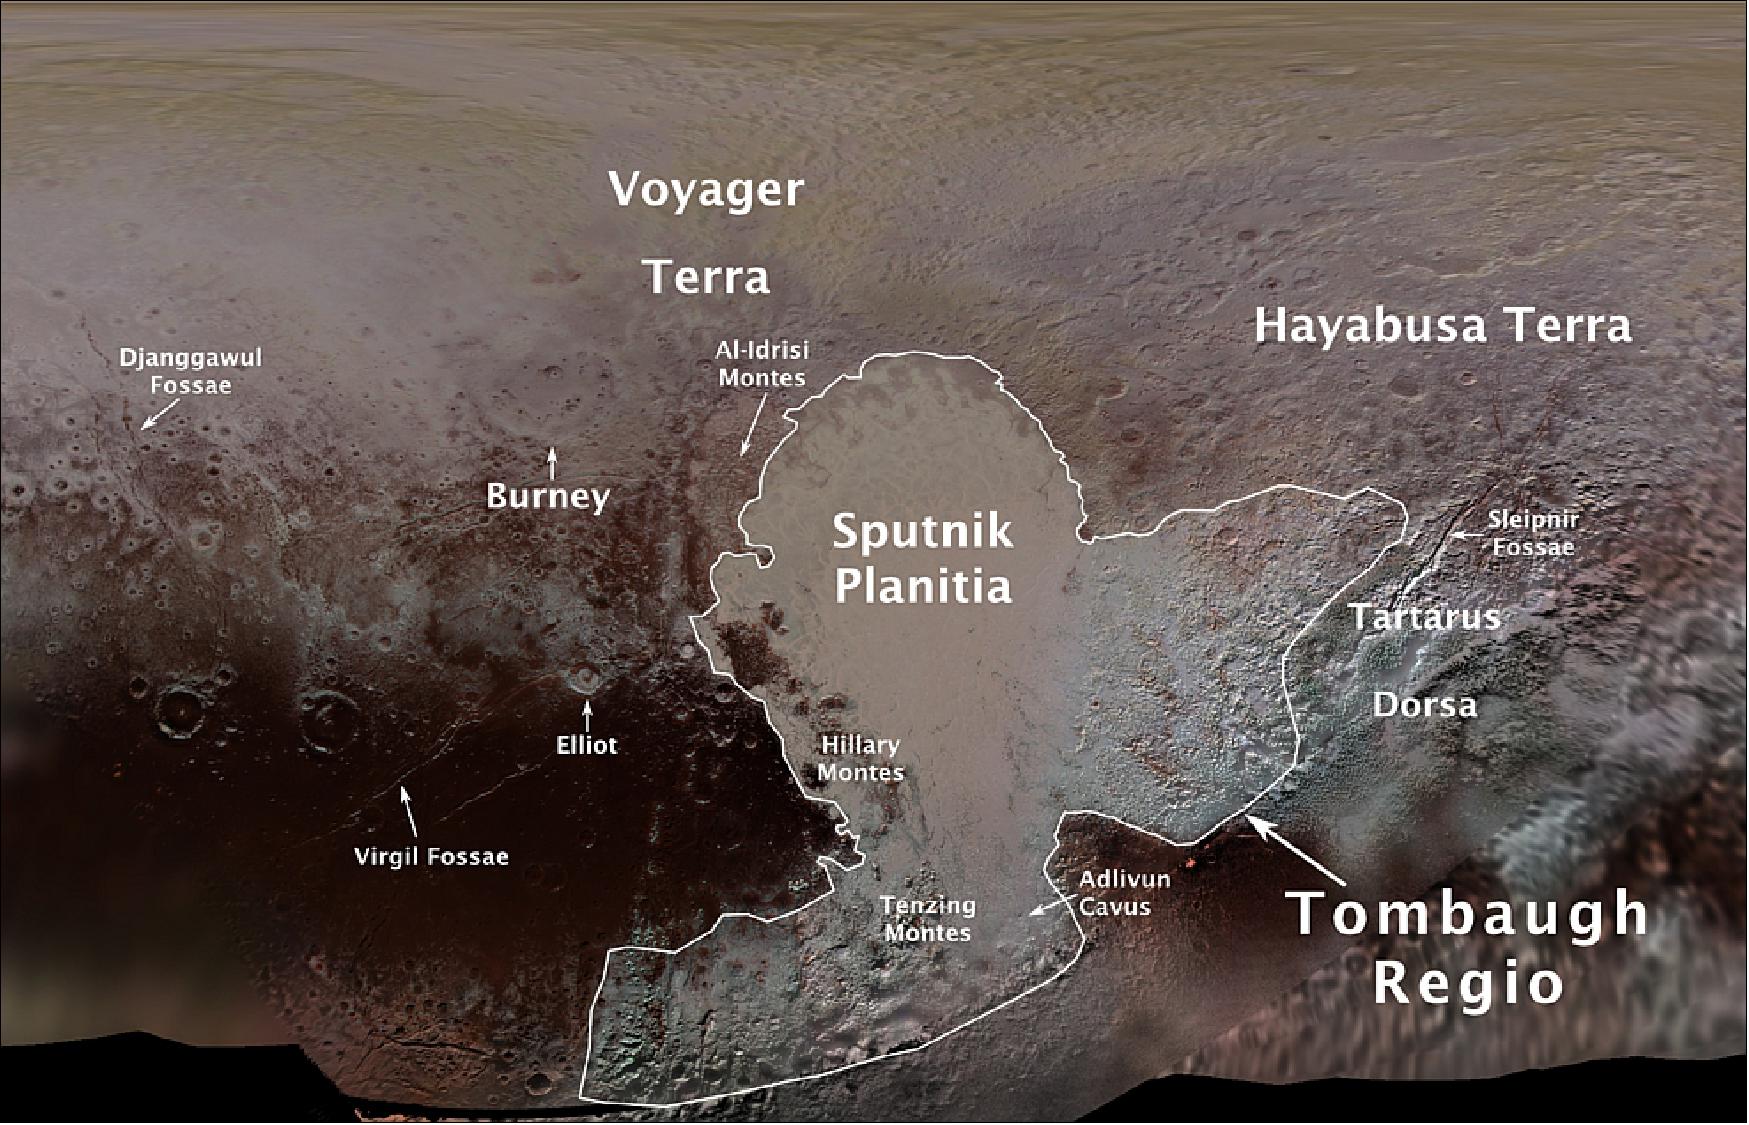 Figure 51: Pluto's first official surface-feature names are marked on this map, compiled from images and data gathered by NASA's New Horizons spacecraft during its flight through the Pluto system in 2015 (image credit: NASA, JHU/APL, SwRI, Ross Beyer)